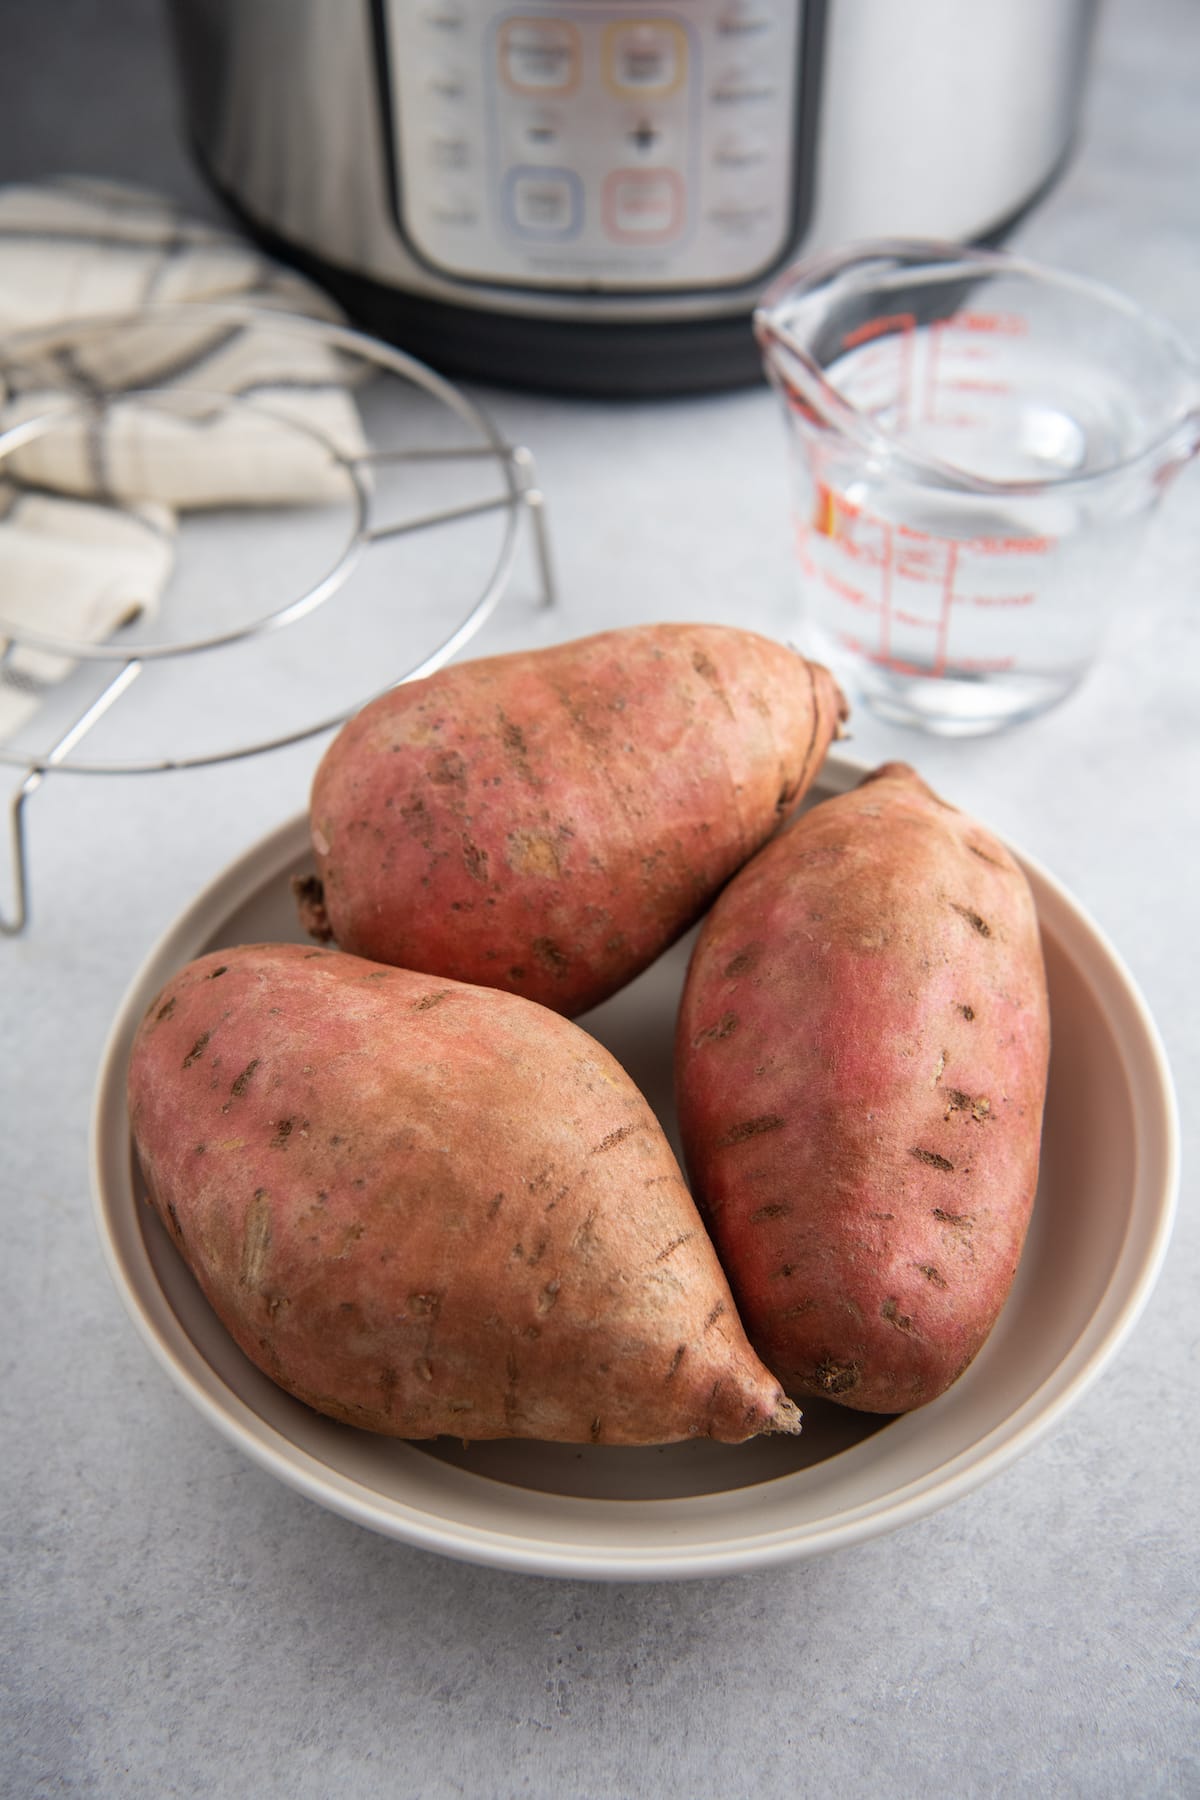 Three sweet potatoes on a white plate in front of an instant pot.